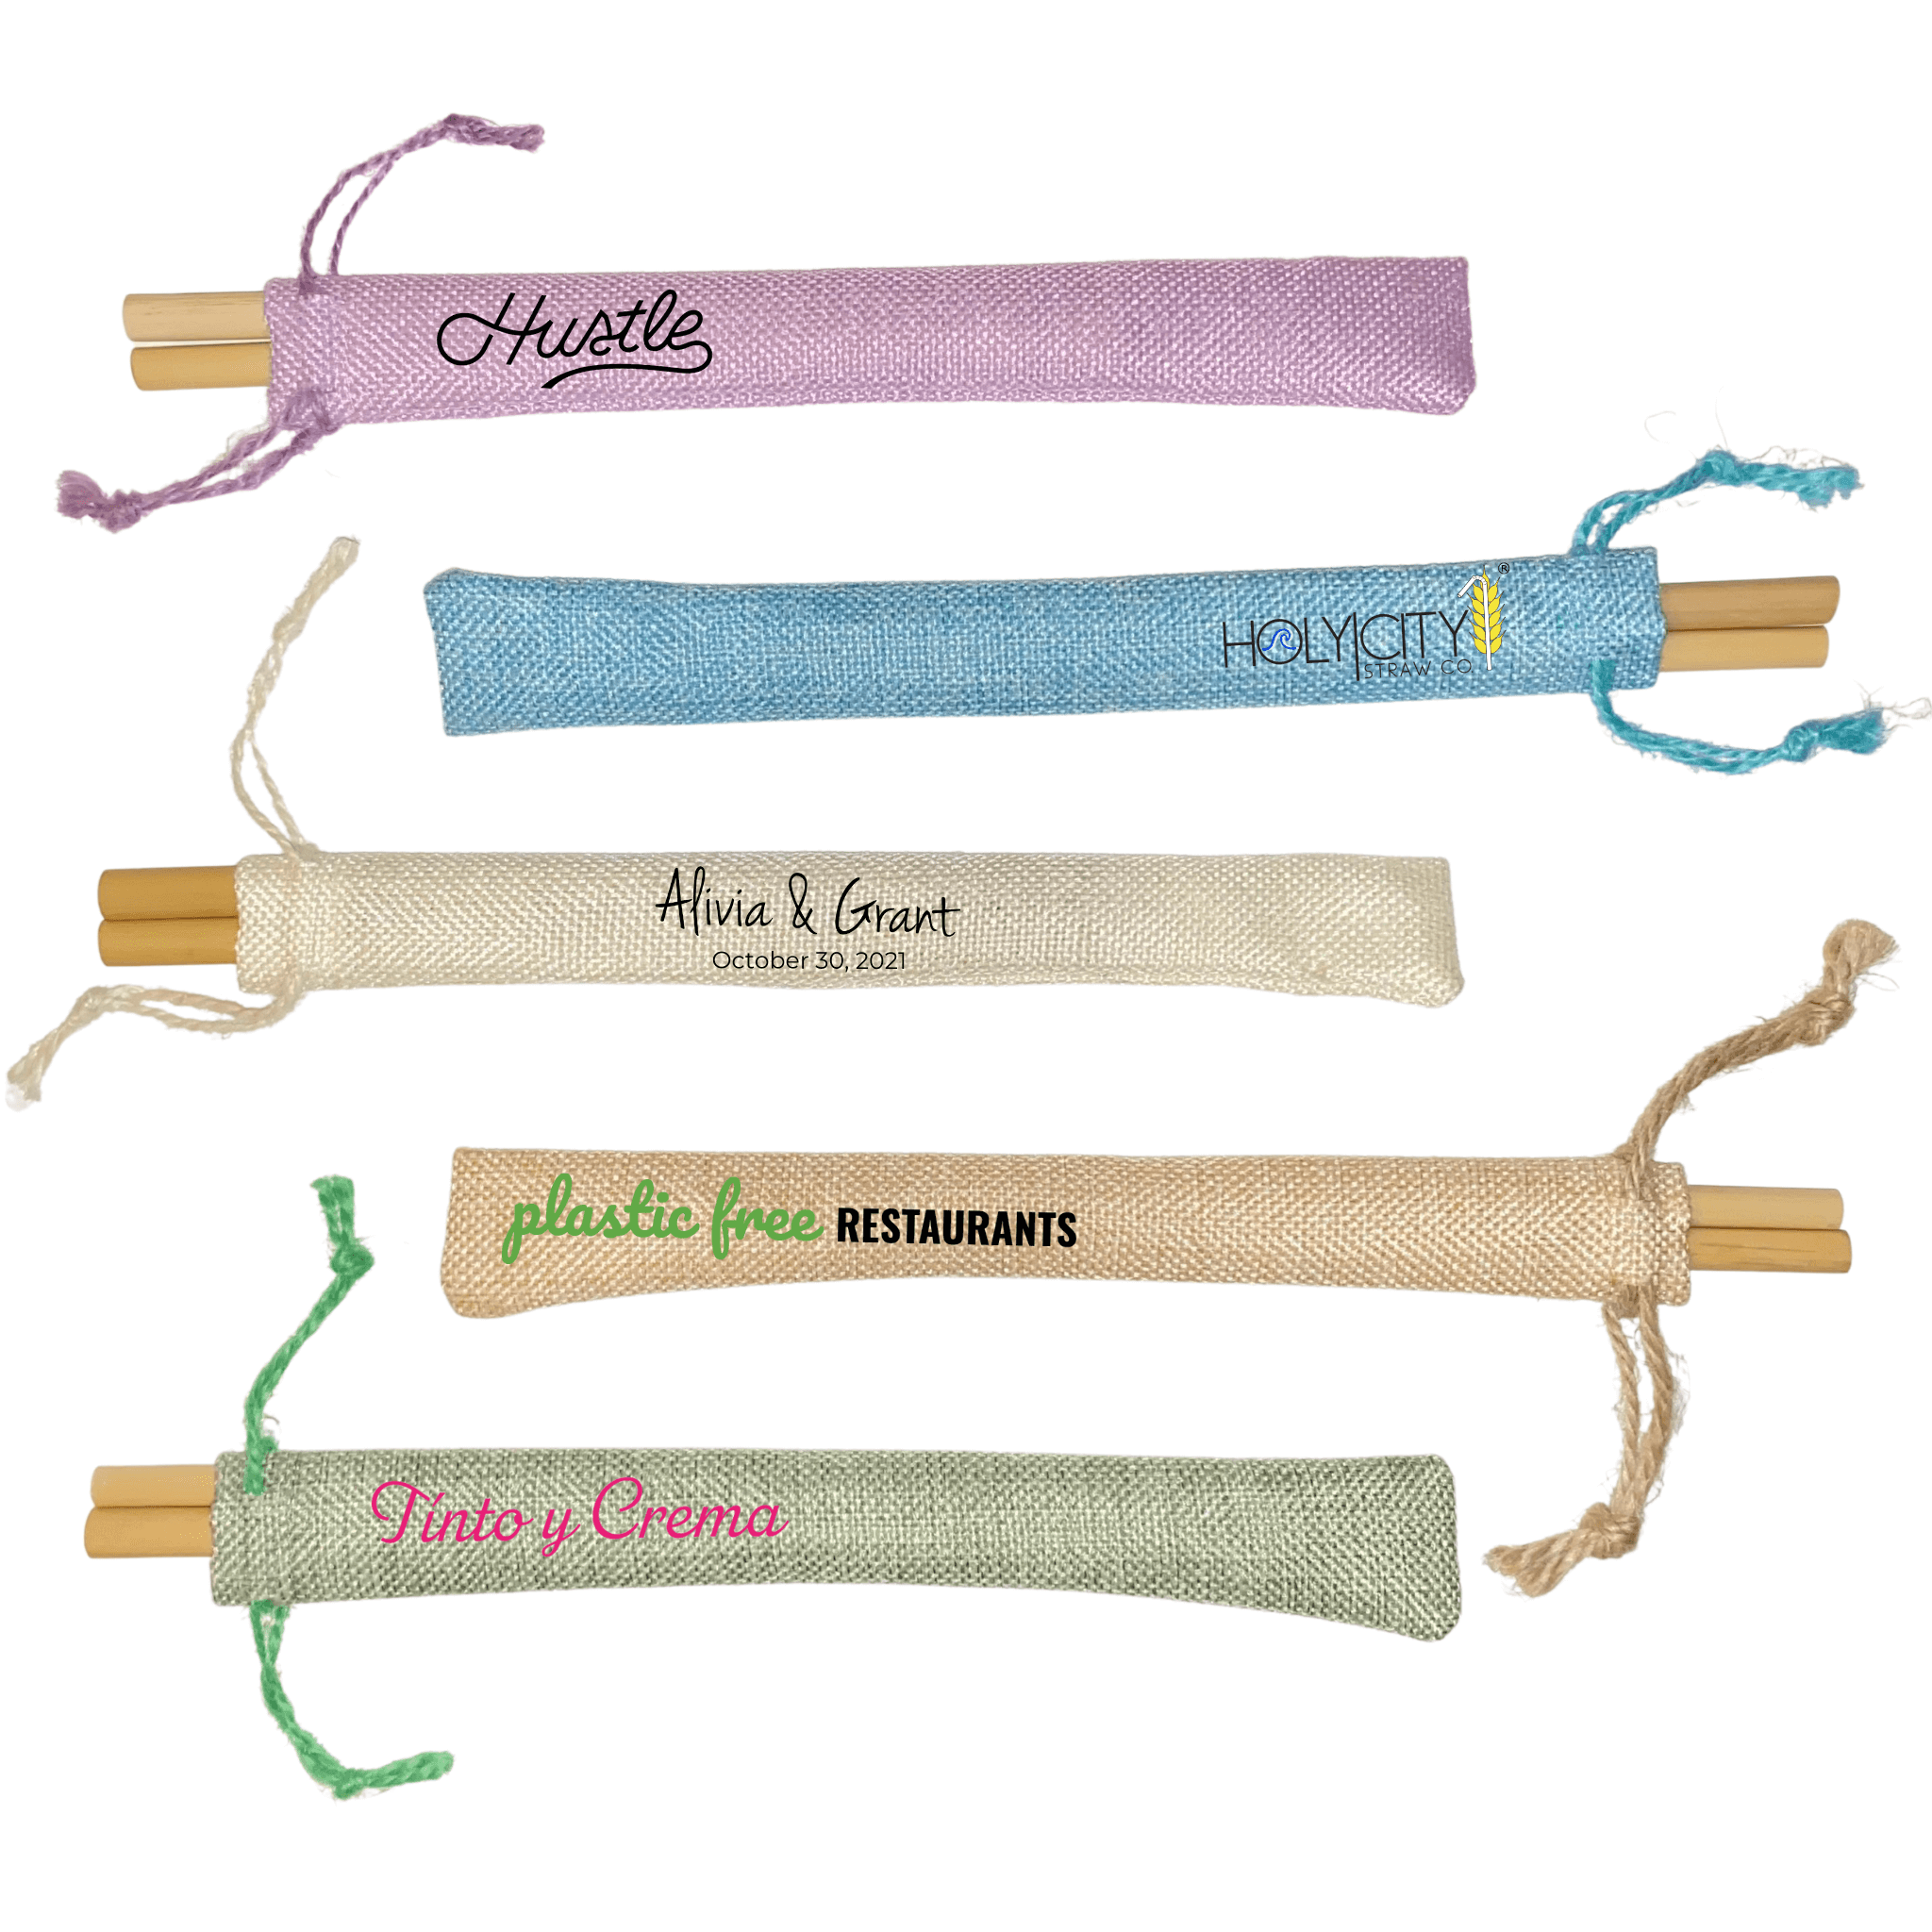 Light colored versions of the Holy City Straw Company two straw branded pouch combos options